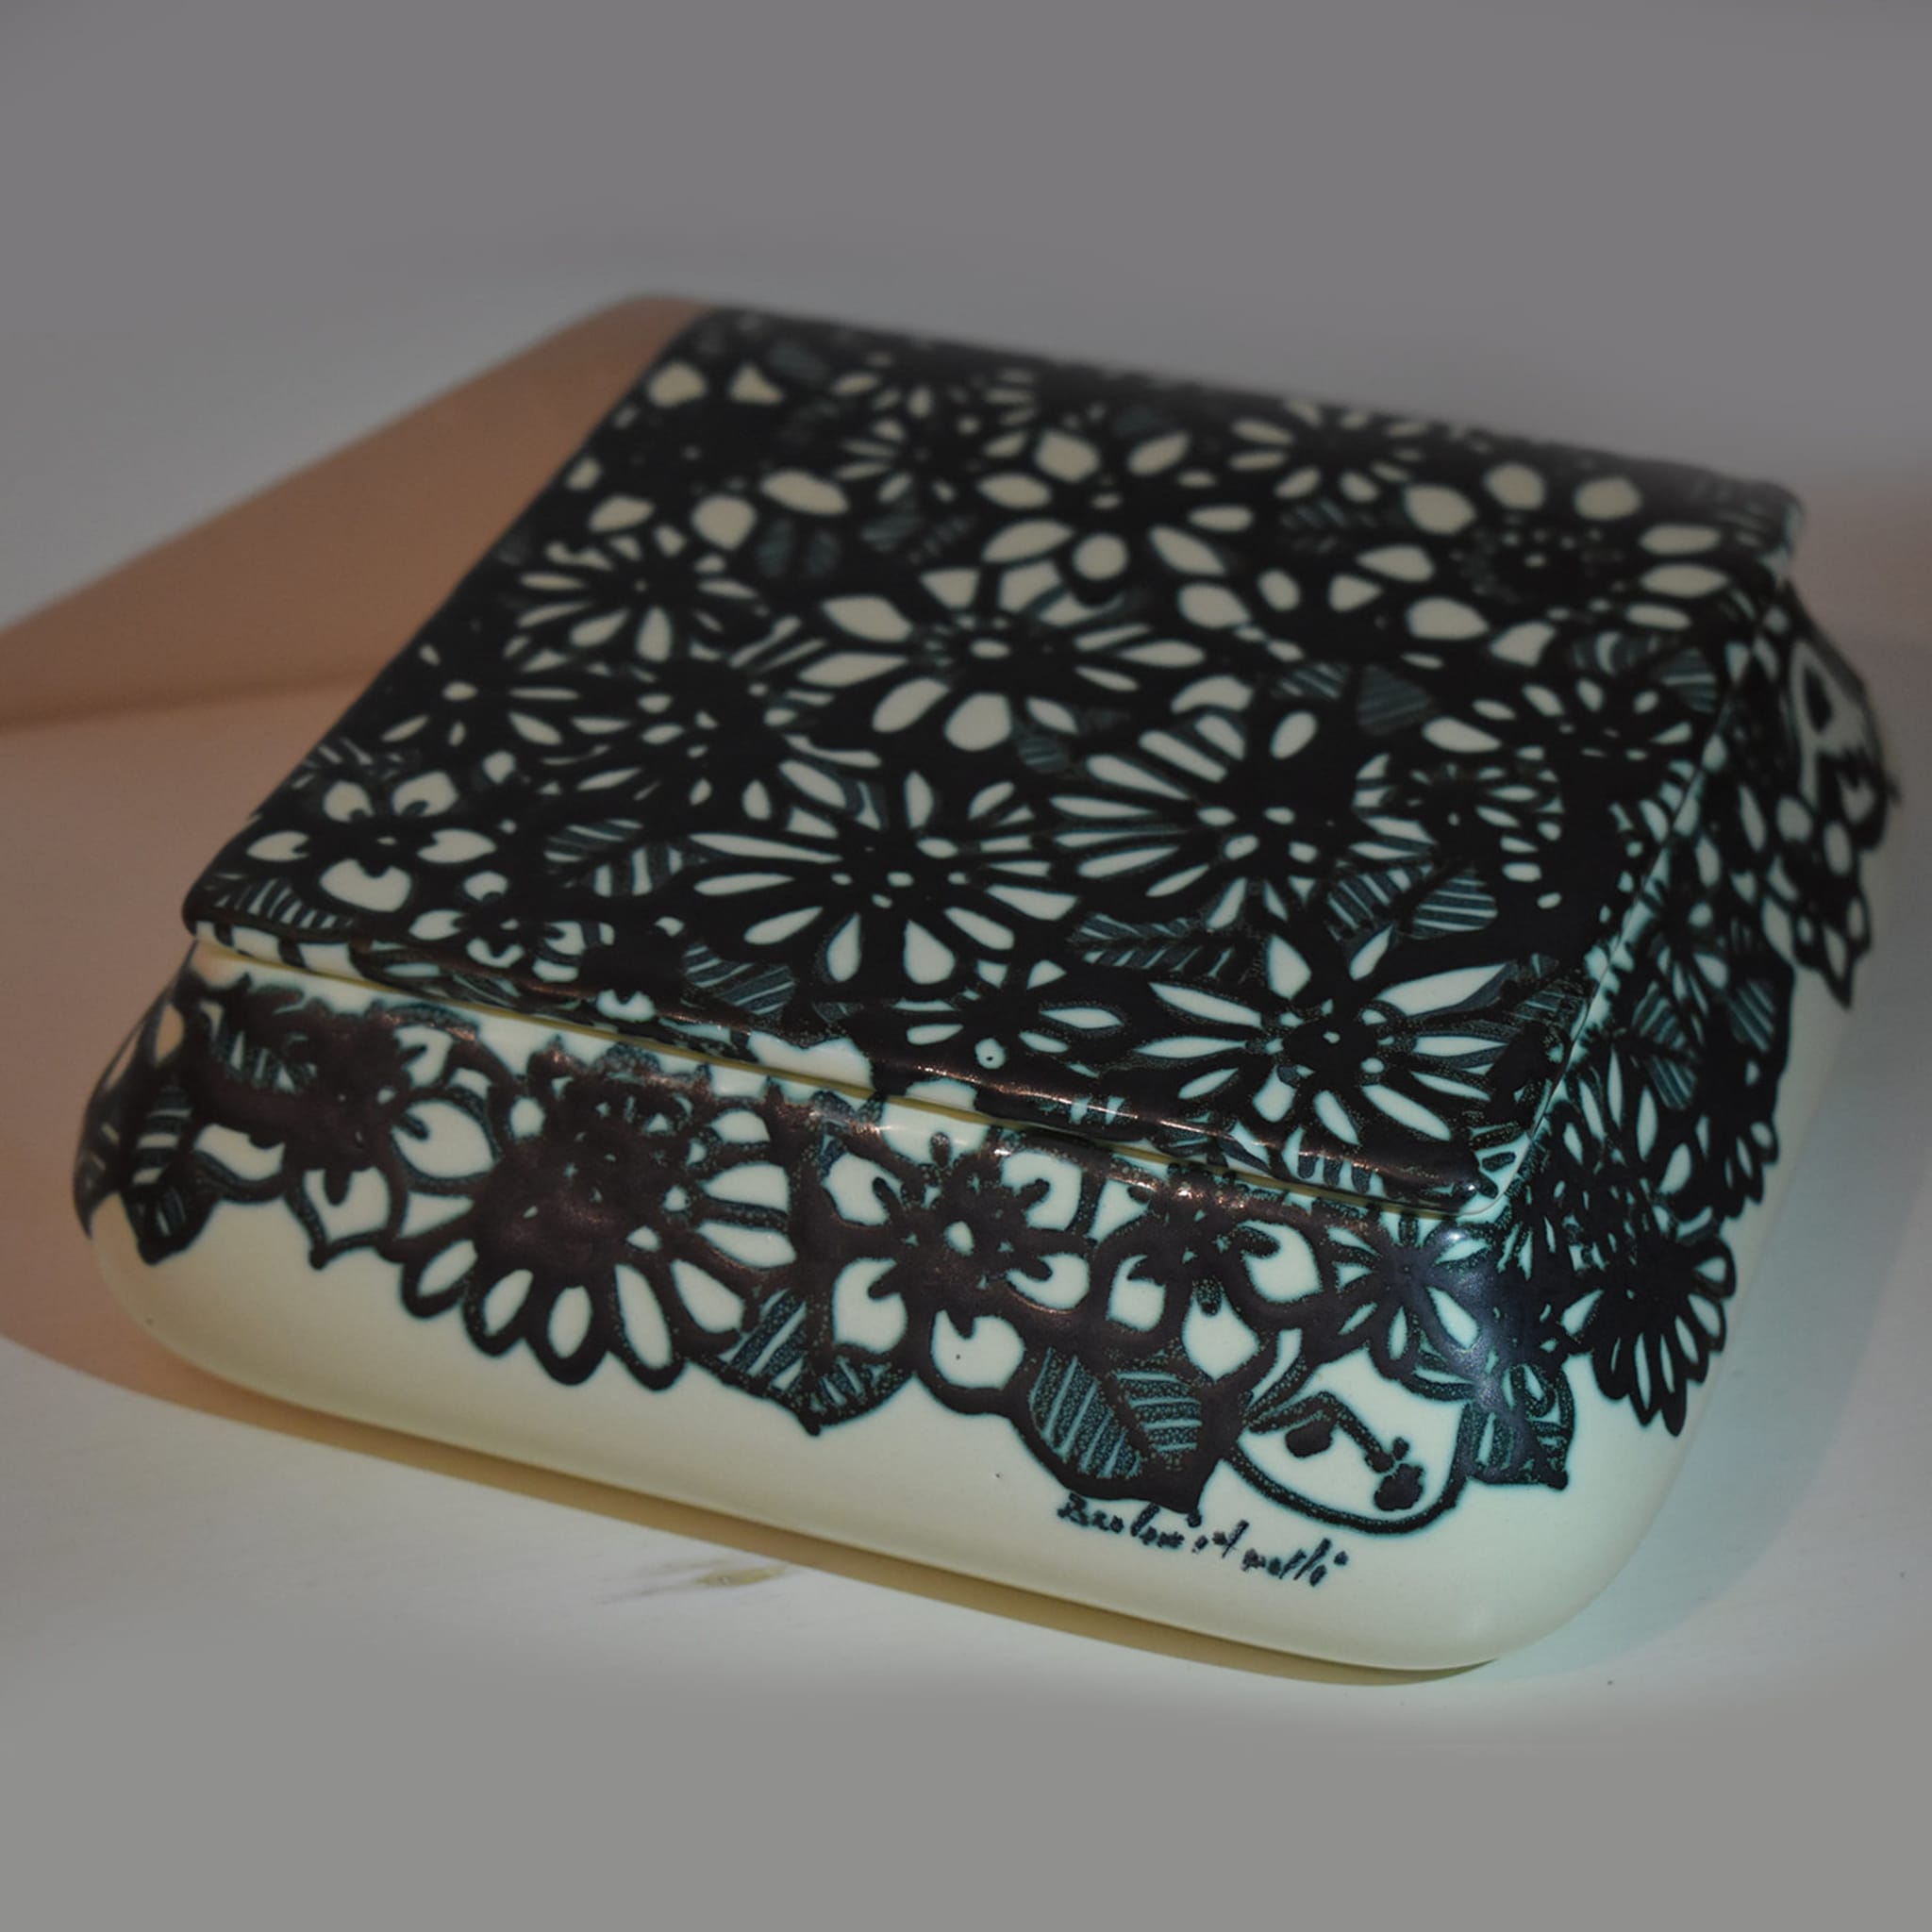 Flowery Box with Square Lid - Alternative view 1